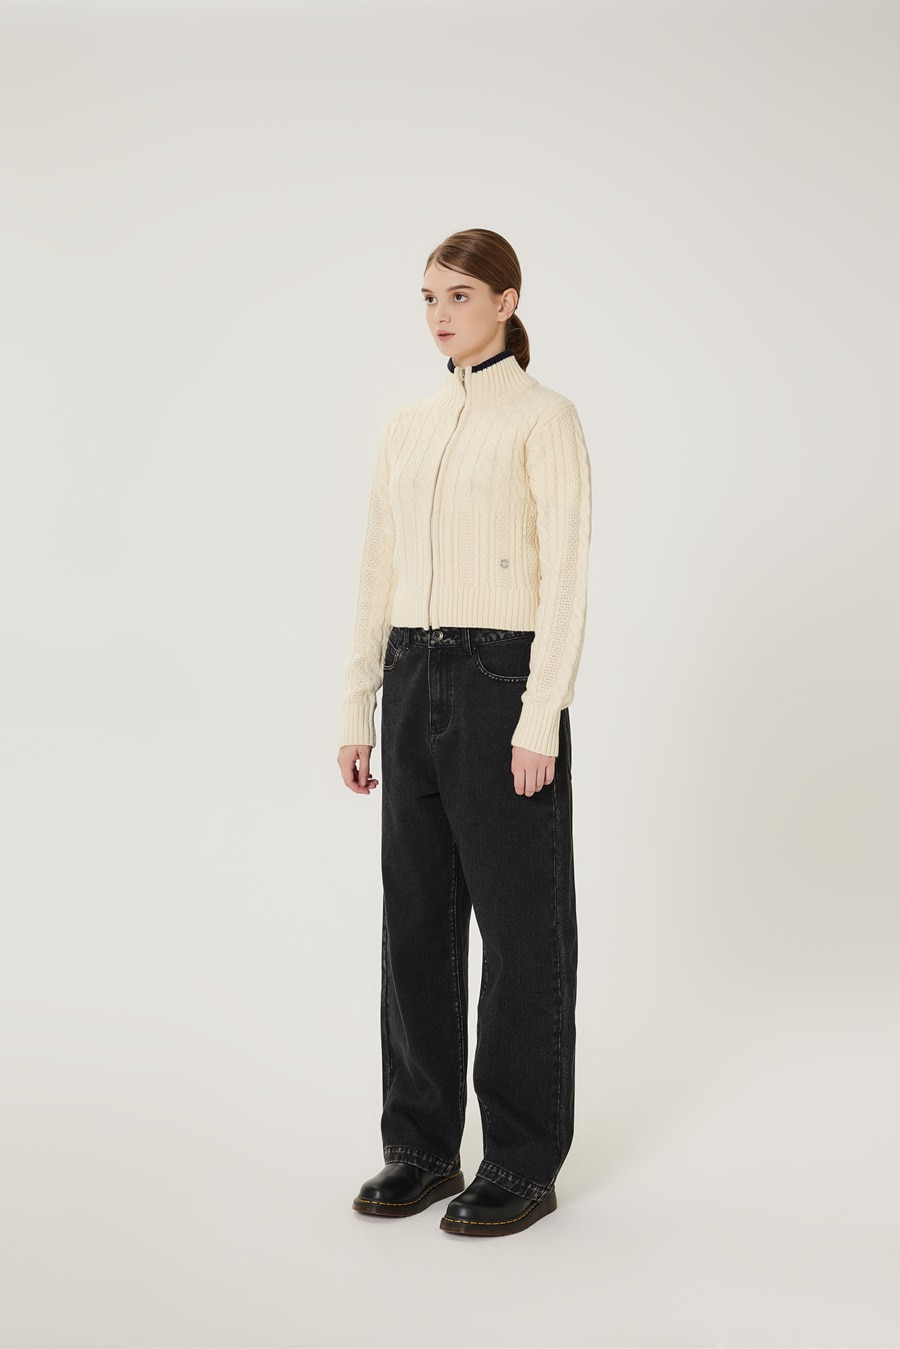 (W) CABLE CROP HIGH-NECK KNIT ZIP UP IVORY